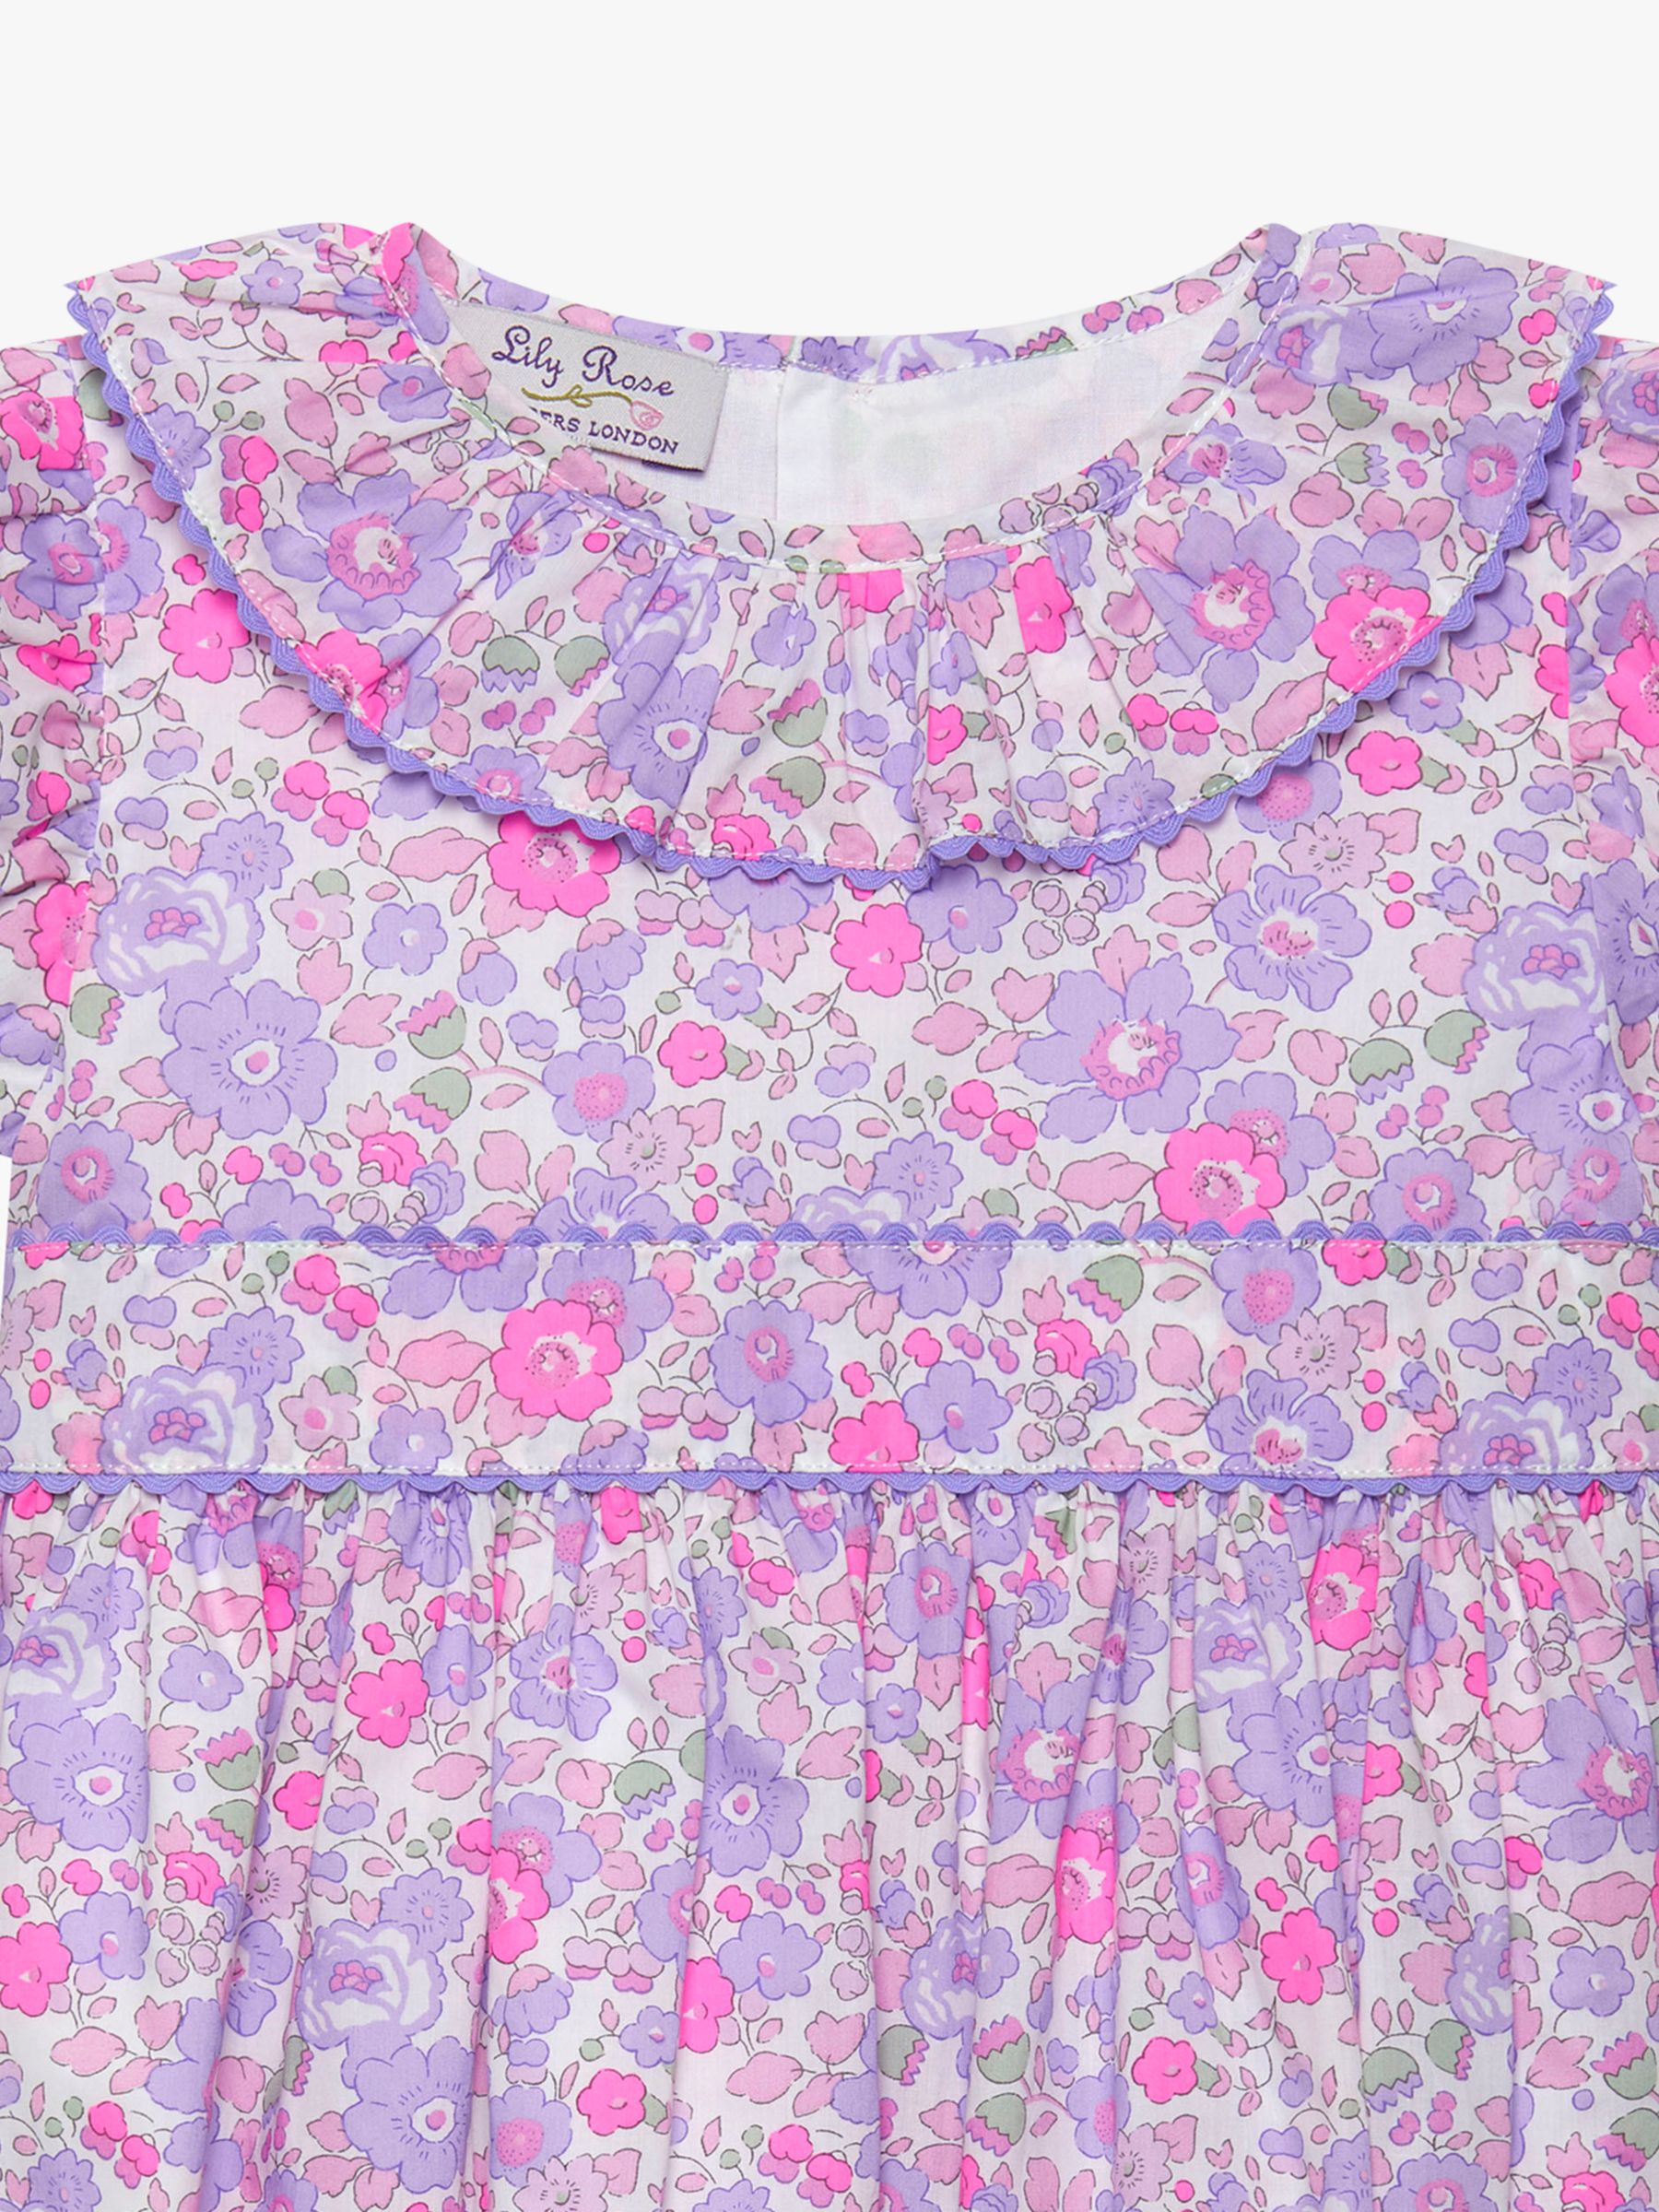 Buy Trotters Kids' Betsy Liberty Floral Print Ric Rac Party Dress, Lilac Online at johnlewis.com